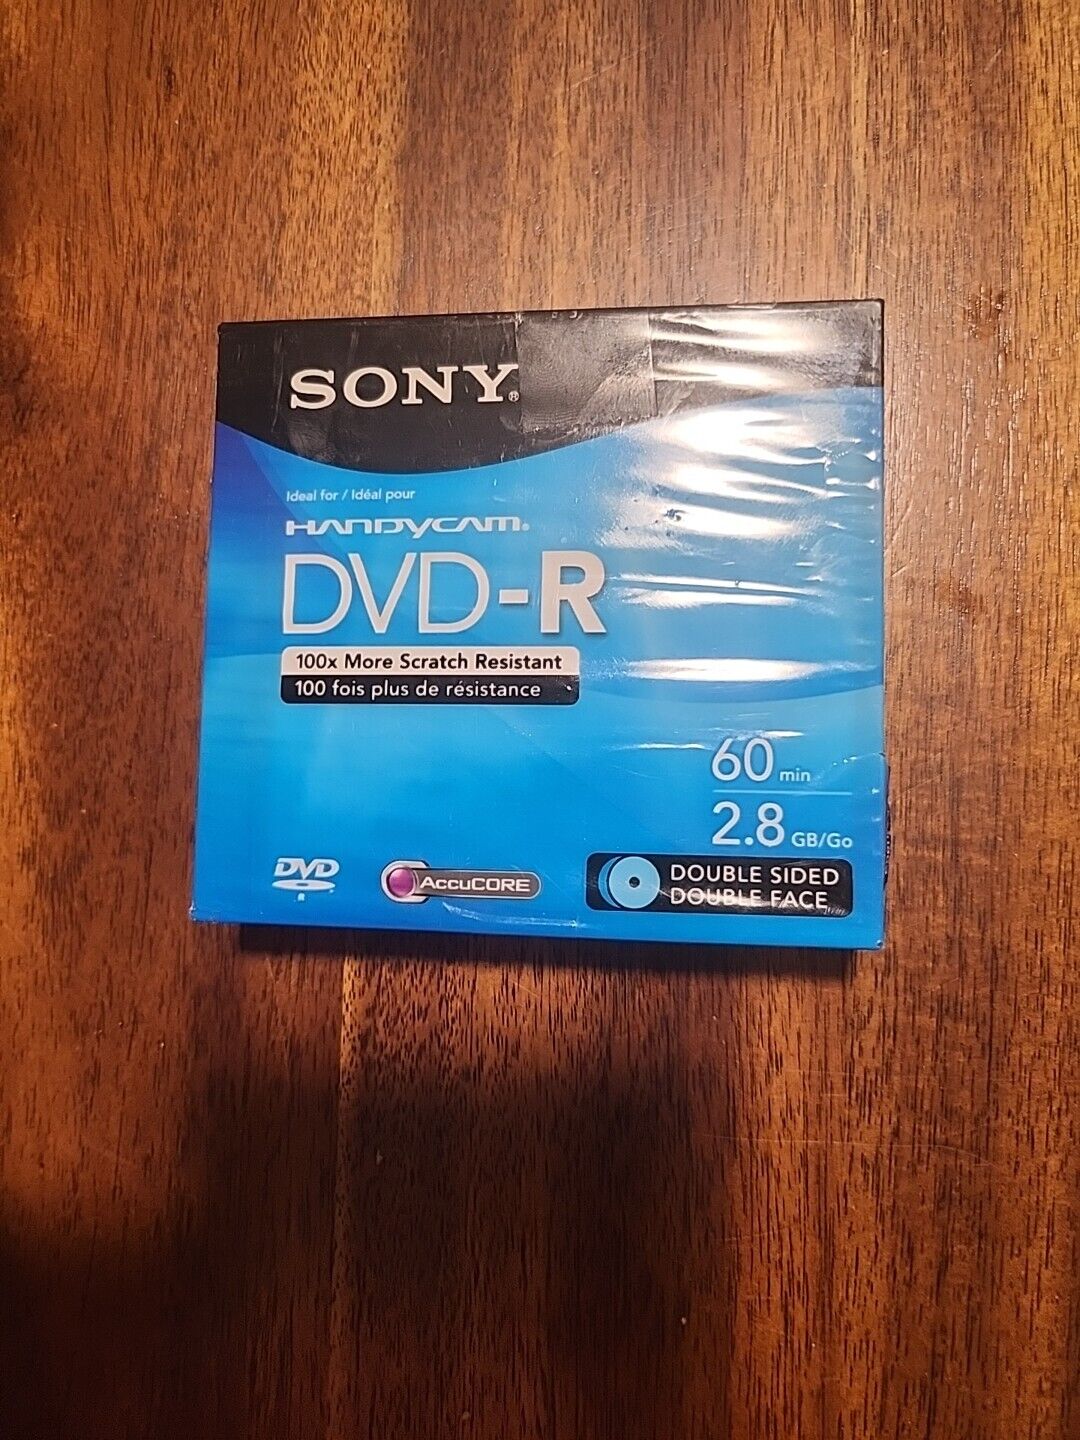 3 SONY HANDYCAM DVD-R 2.8 GB 60 MINUTES DOUBLE SIDED BRAND NEW SEALED. LOT OF 3